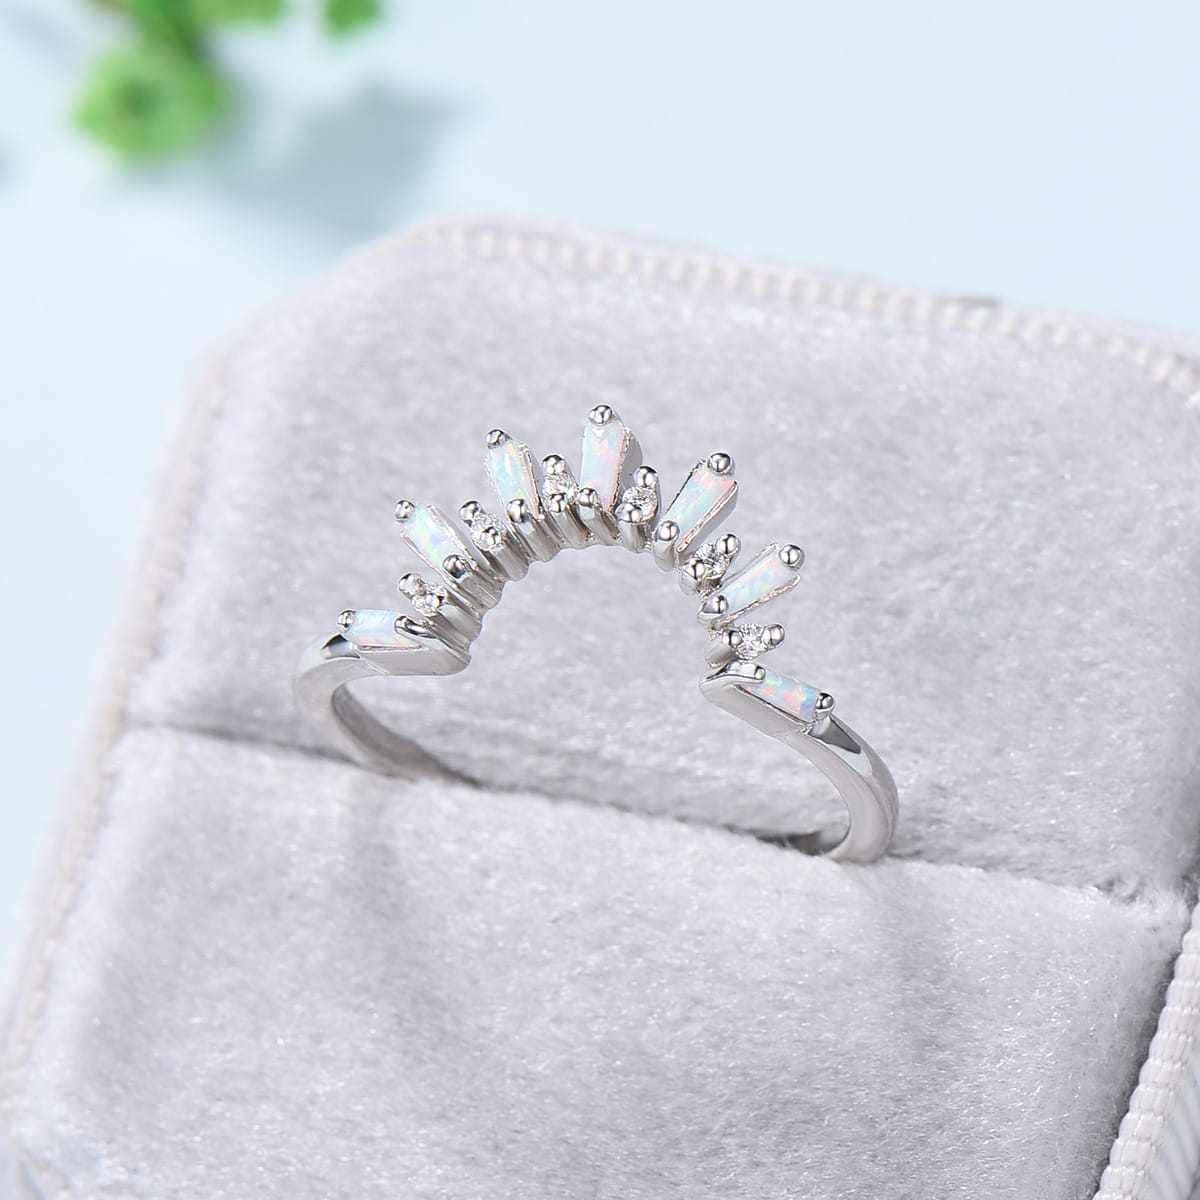 Vintage Curved White Opal Diamond Wedding Ring Women Baguette Fire Opal Stacking Band 14K White Gold Anniversary Ring Promise Ring For Her - PENFINE